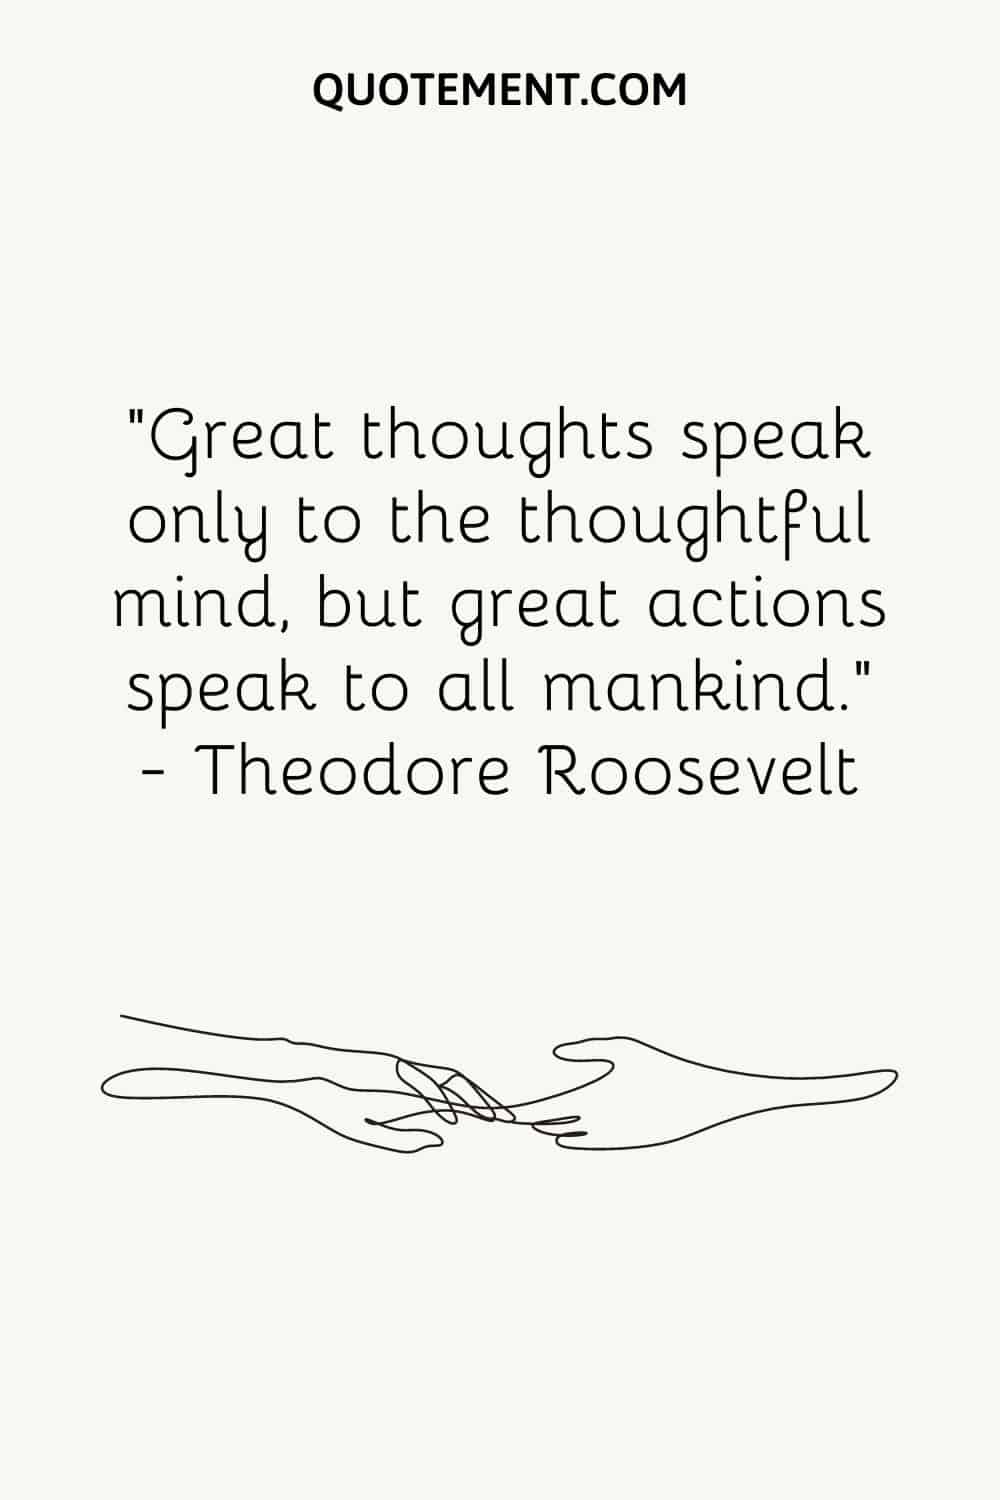 Great thoughts speak only to the thoughtful mind, but great actions speak to all mankind